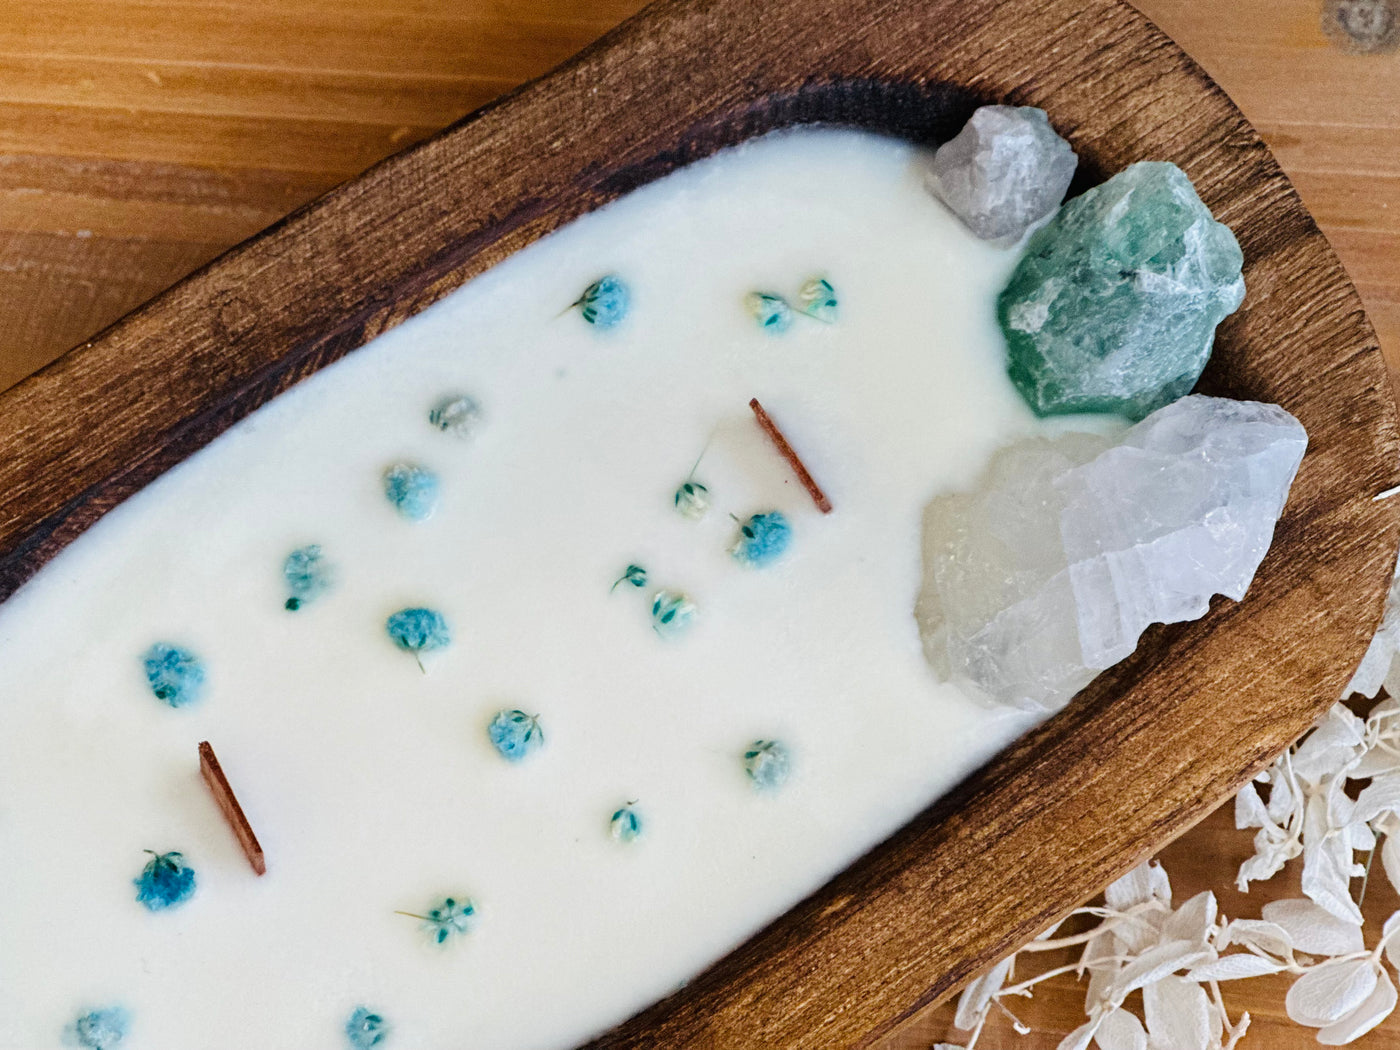 Turquoise & Crystals Dough Bowl Candle (Pomegranate Cider)